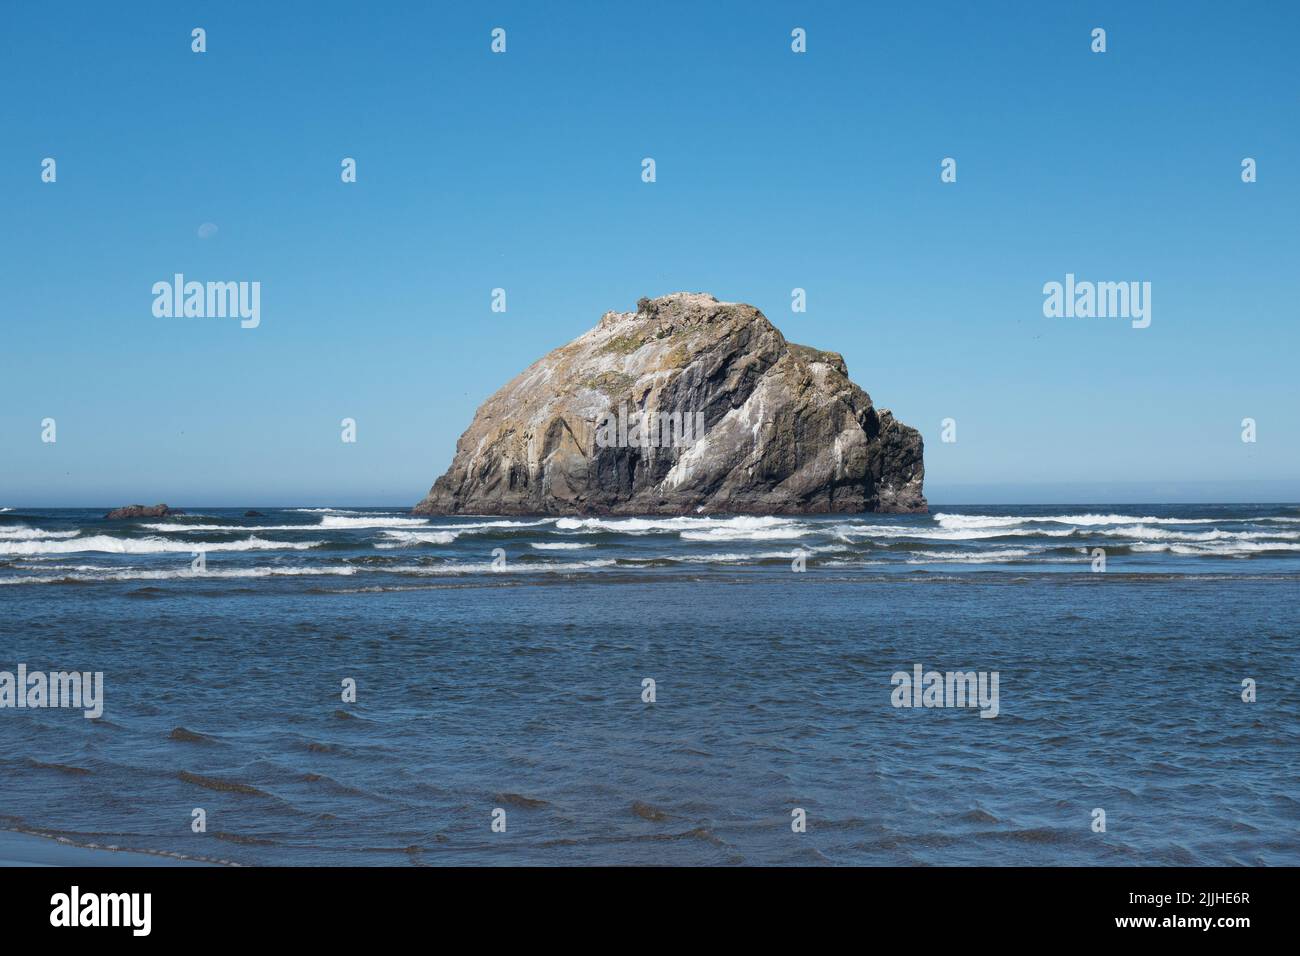 A large rock that looks like a woman's face, at Face Rock Beach in Bandon, Oregon. Stock Photo